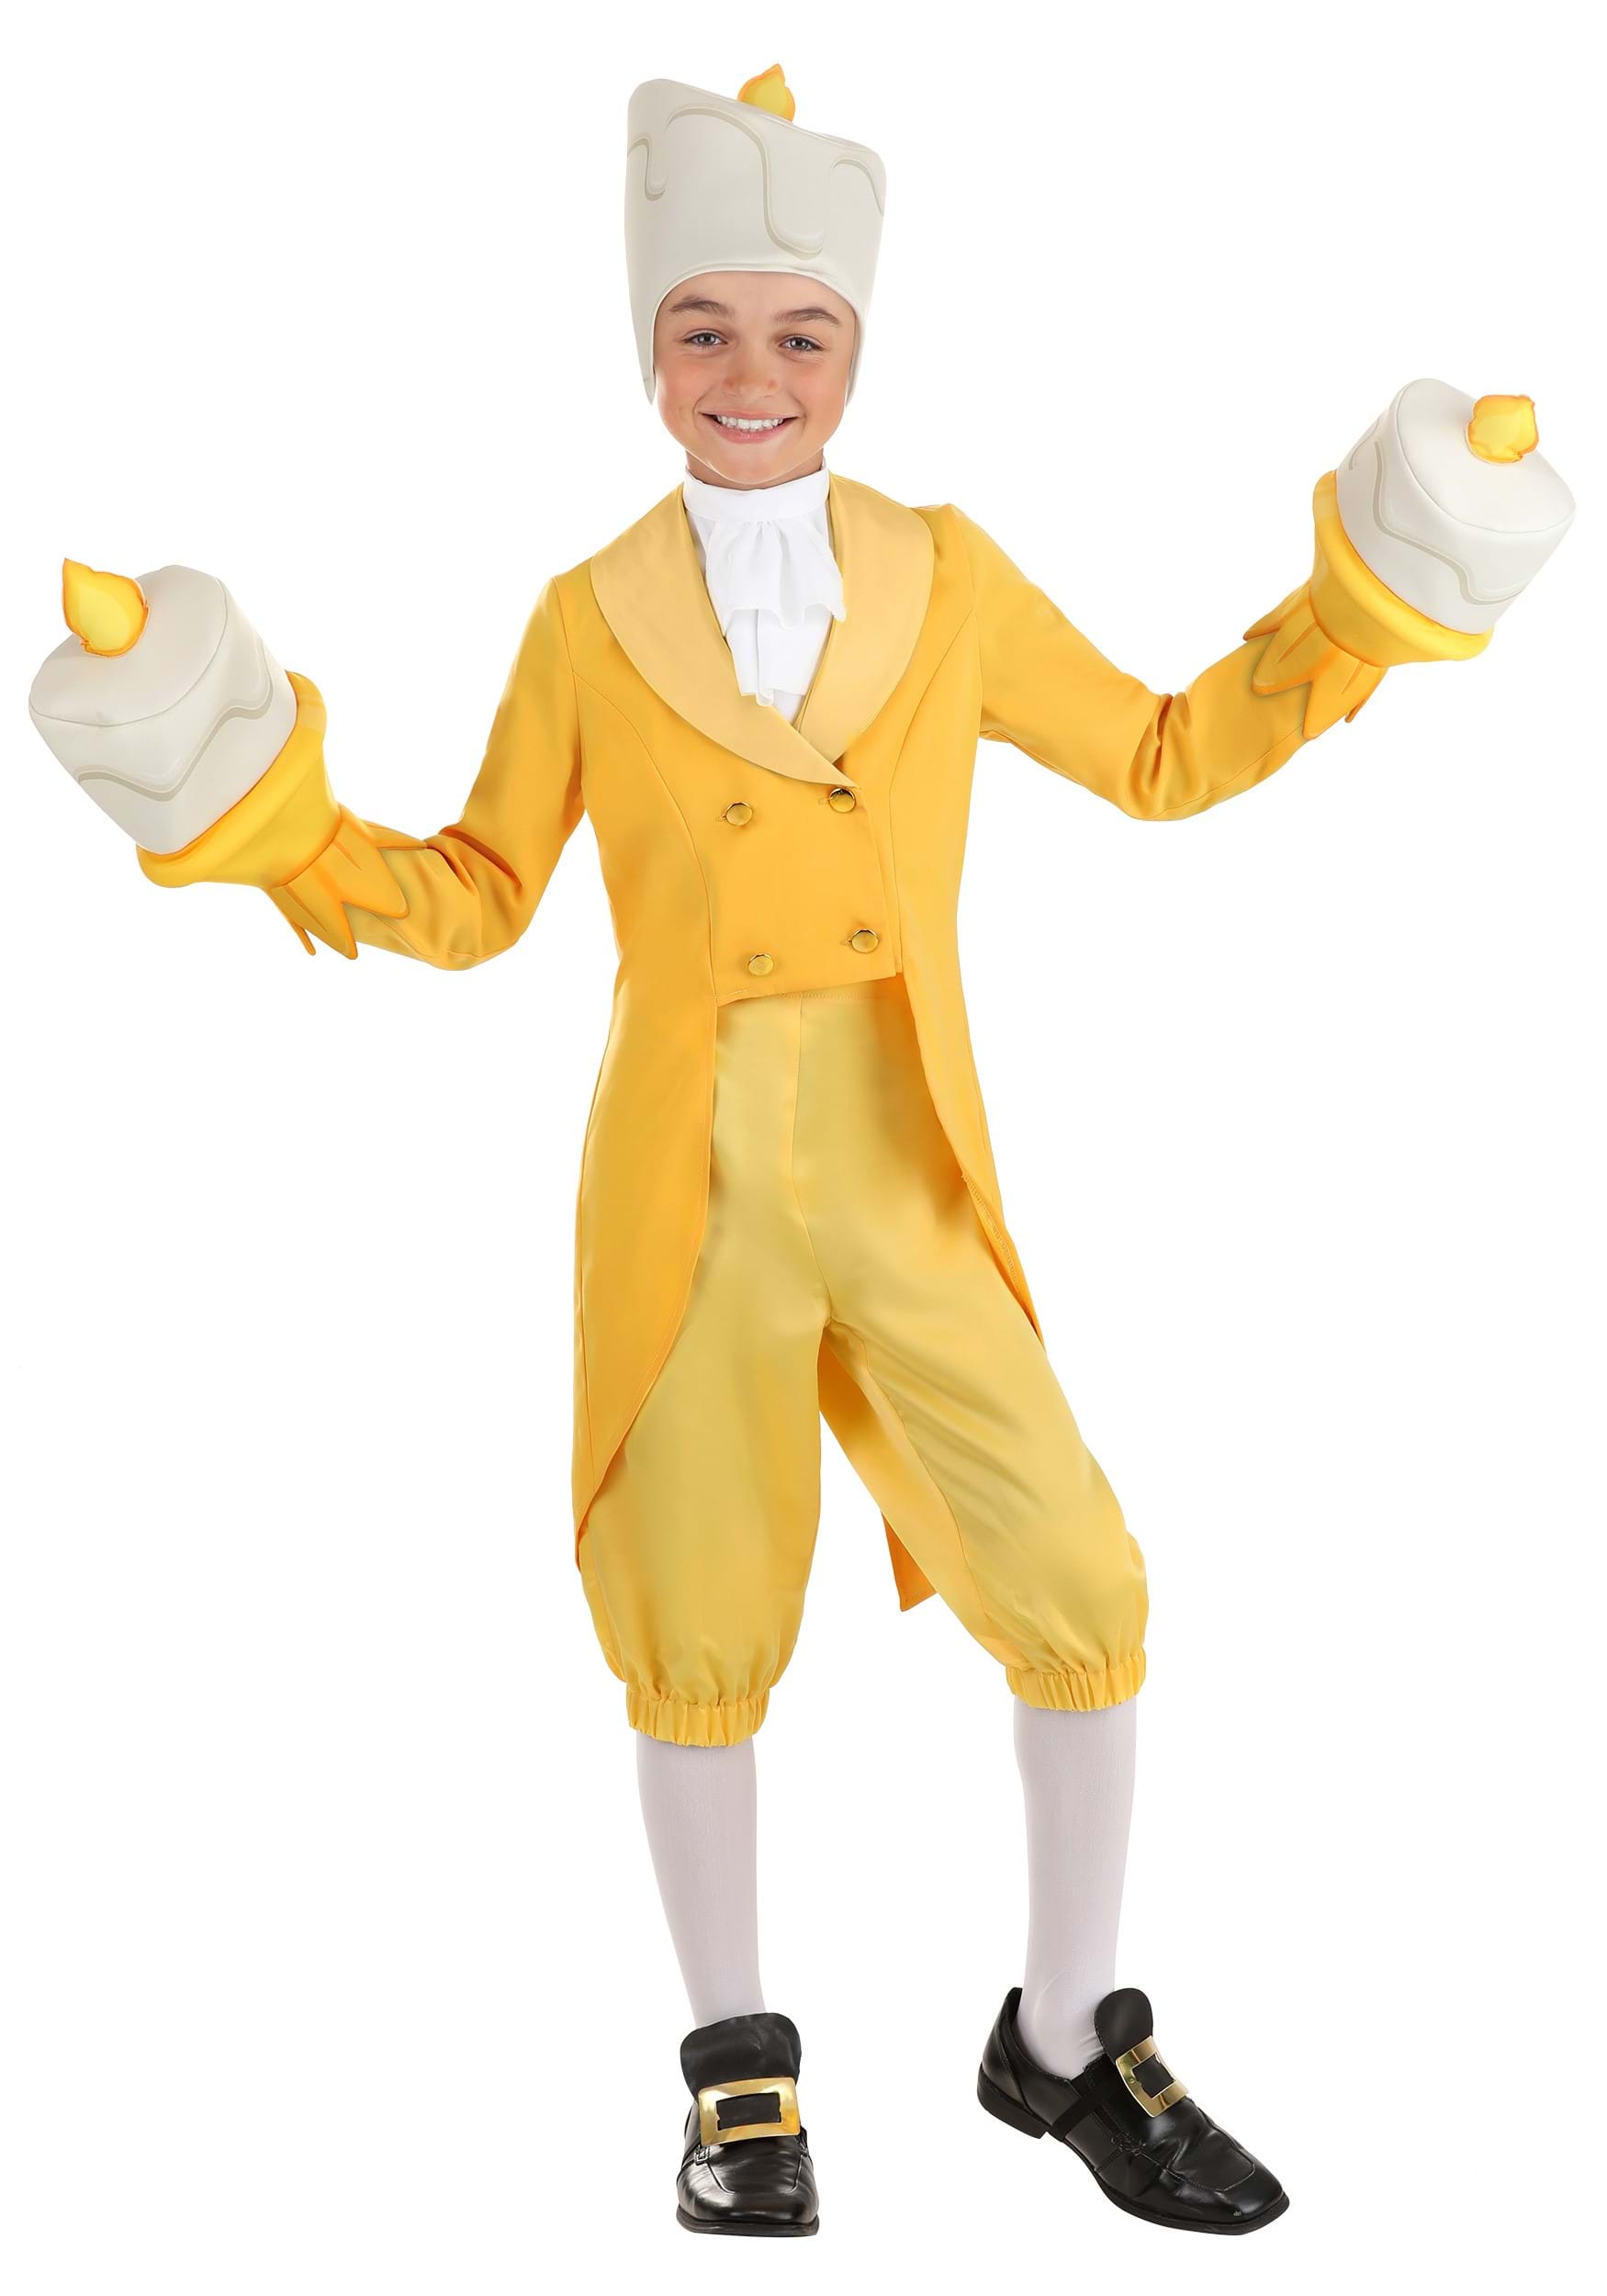 Photos - Fancy Dress A&D FUN Costumes Kids Beauty and the Beast Lumiere Costume Orange/White 